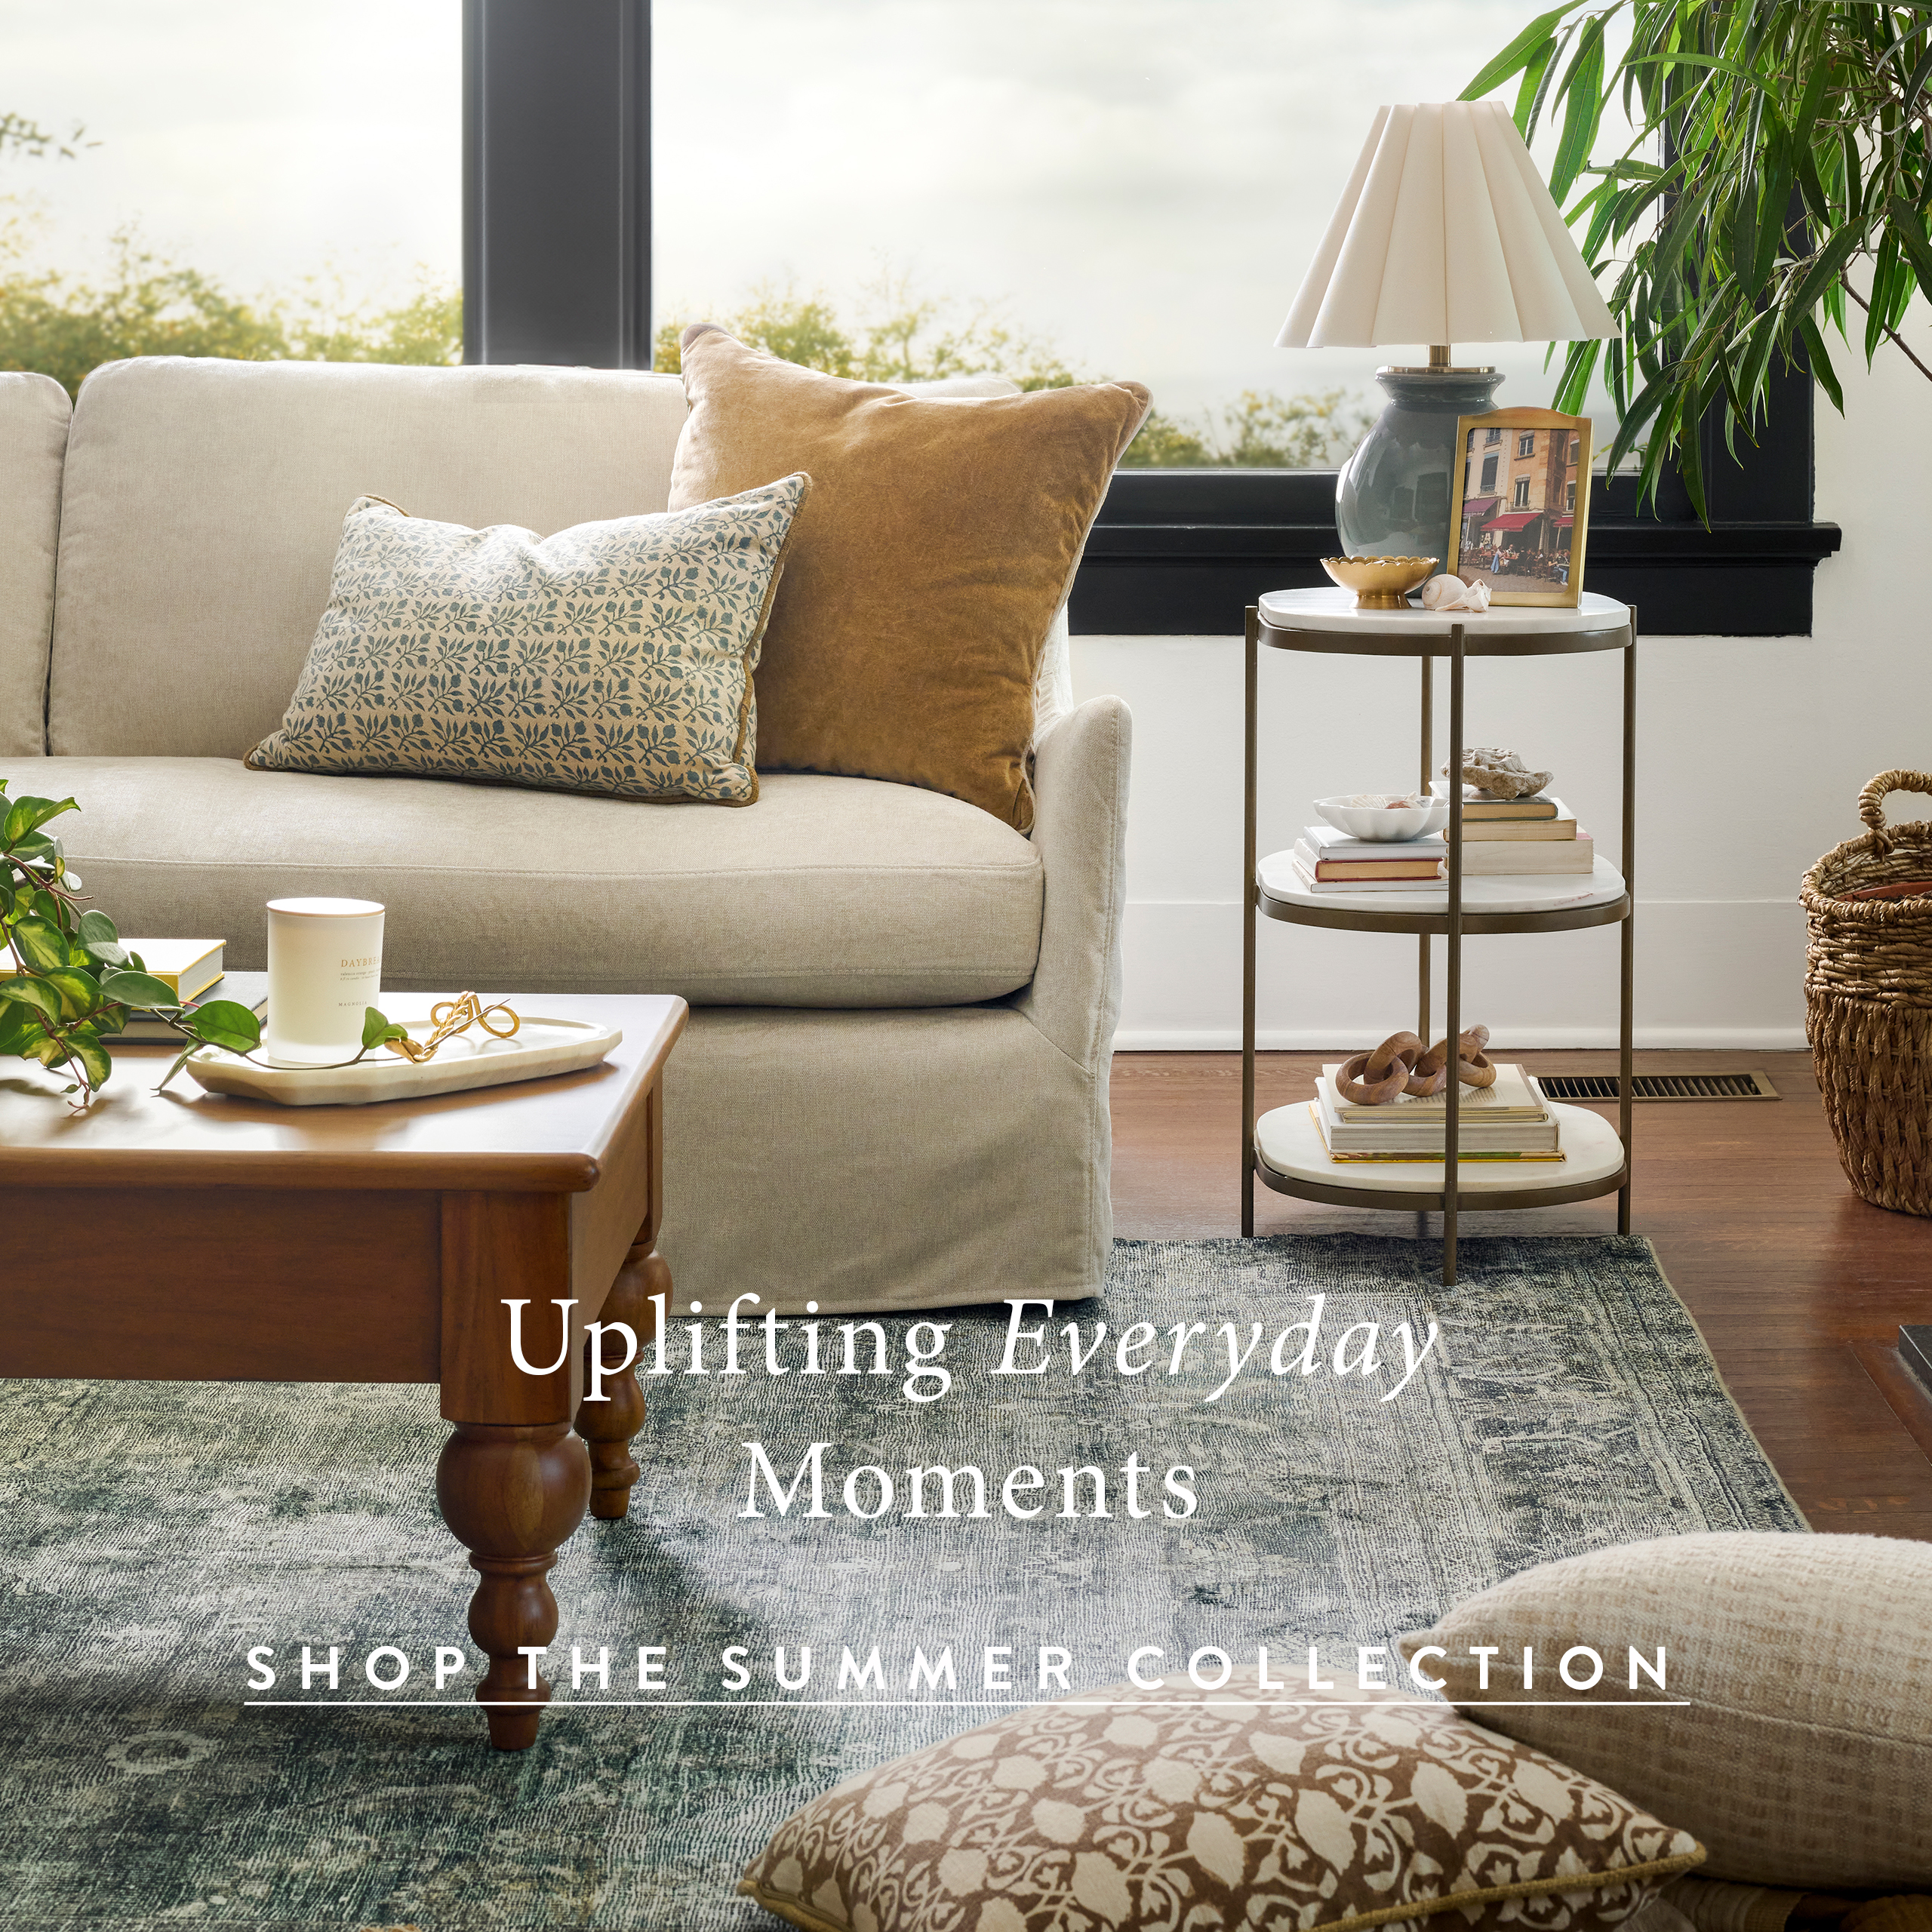 Uplifting Everyday Moments.  Shop the Summer Collection.